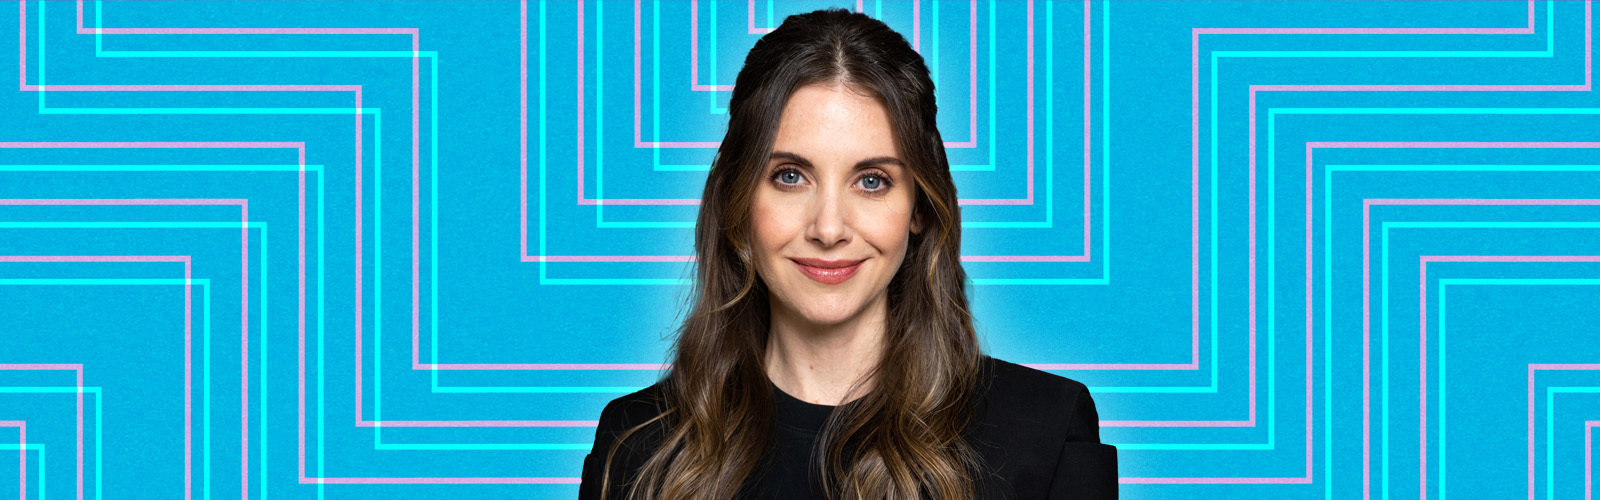 Alison Brie On ‘Apples Never Fall’ And Doing Things That Scare Her